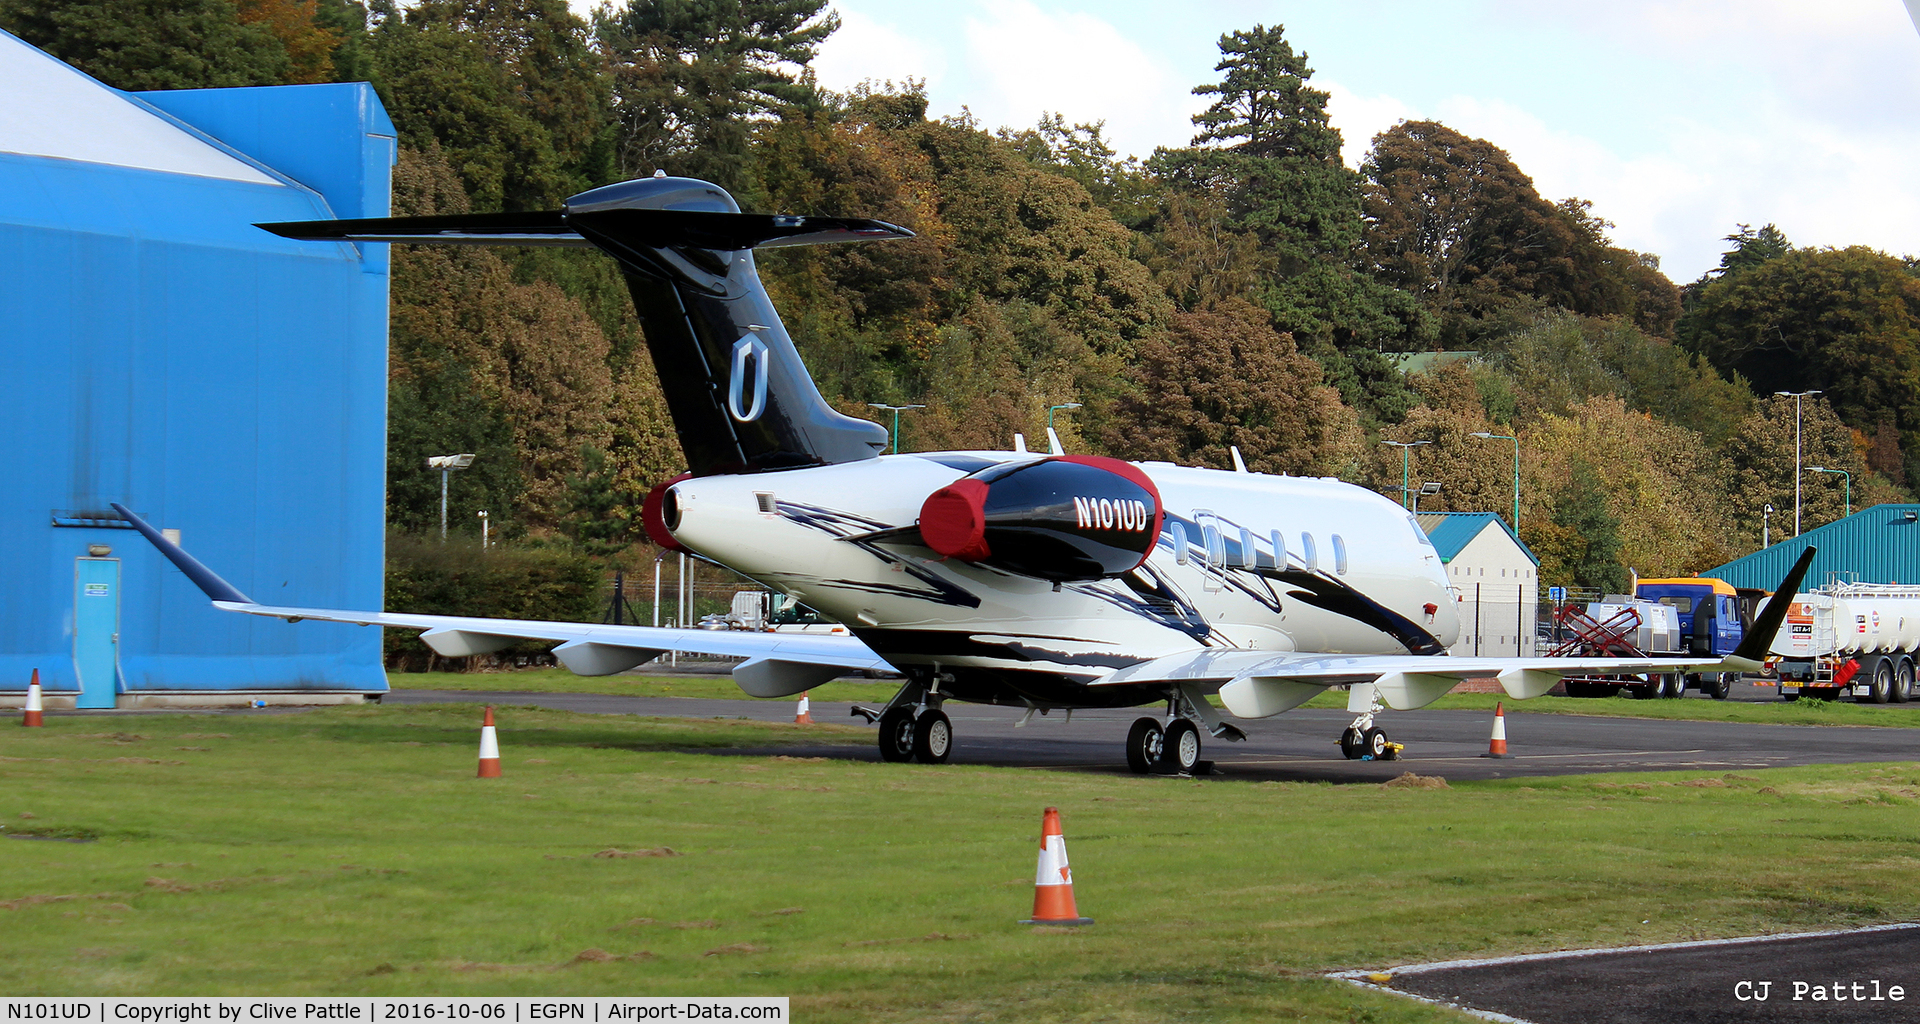 N101UD, 2008 Bombardier Challenger 300 (BD-100-1A10) C/N 20220, At Dundee Riverside Airport EGPN for the Annual Golf Dunhill Links Championships, held at nearby St Andrews.